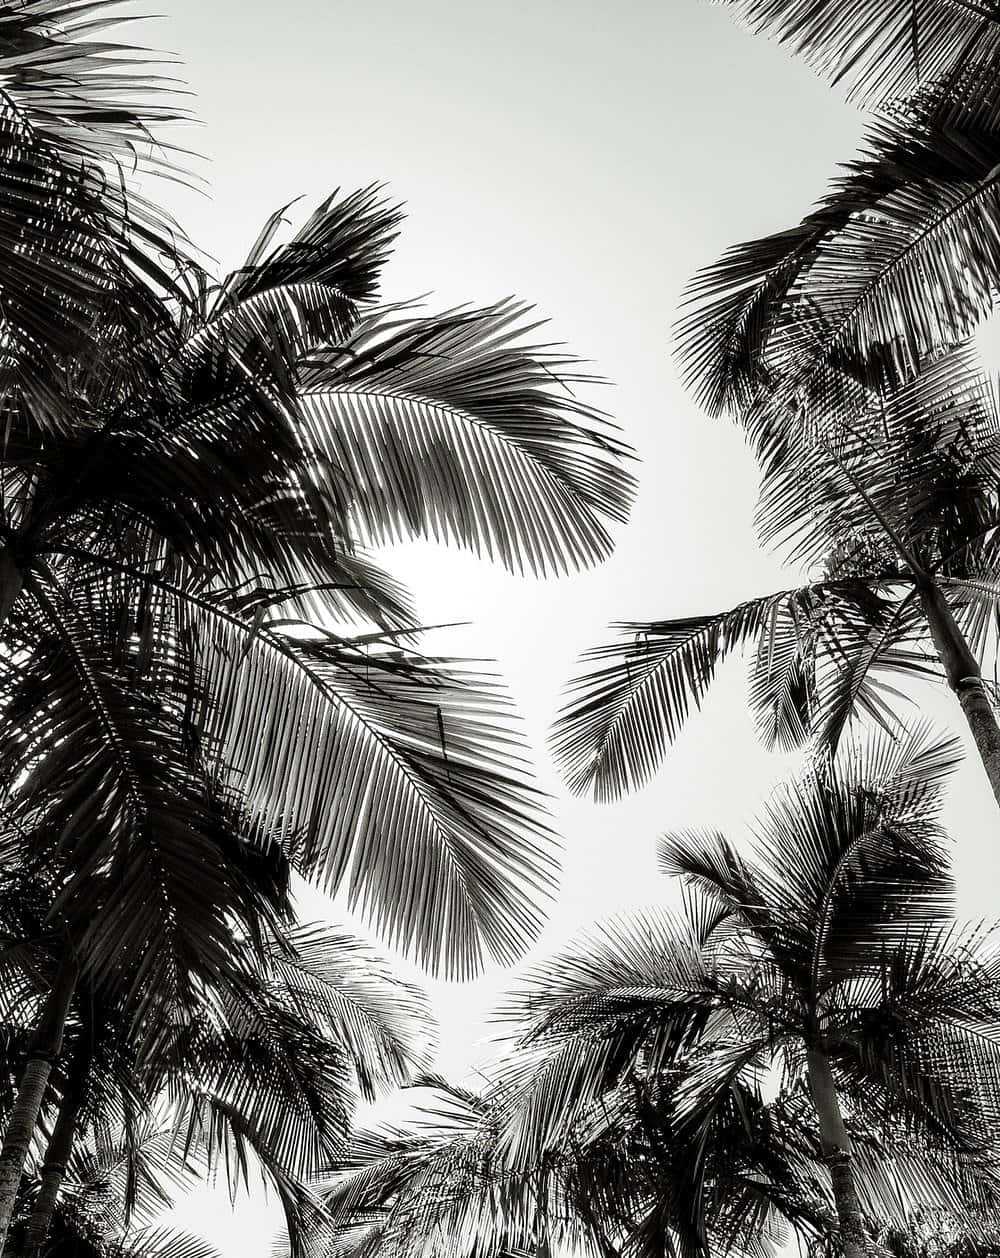 A starkly contrasting black and white Palm Tree against a sandy shoreline. Wallpaper